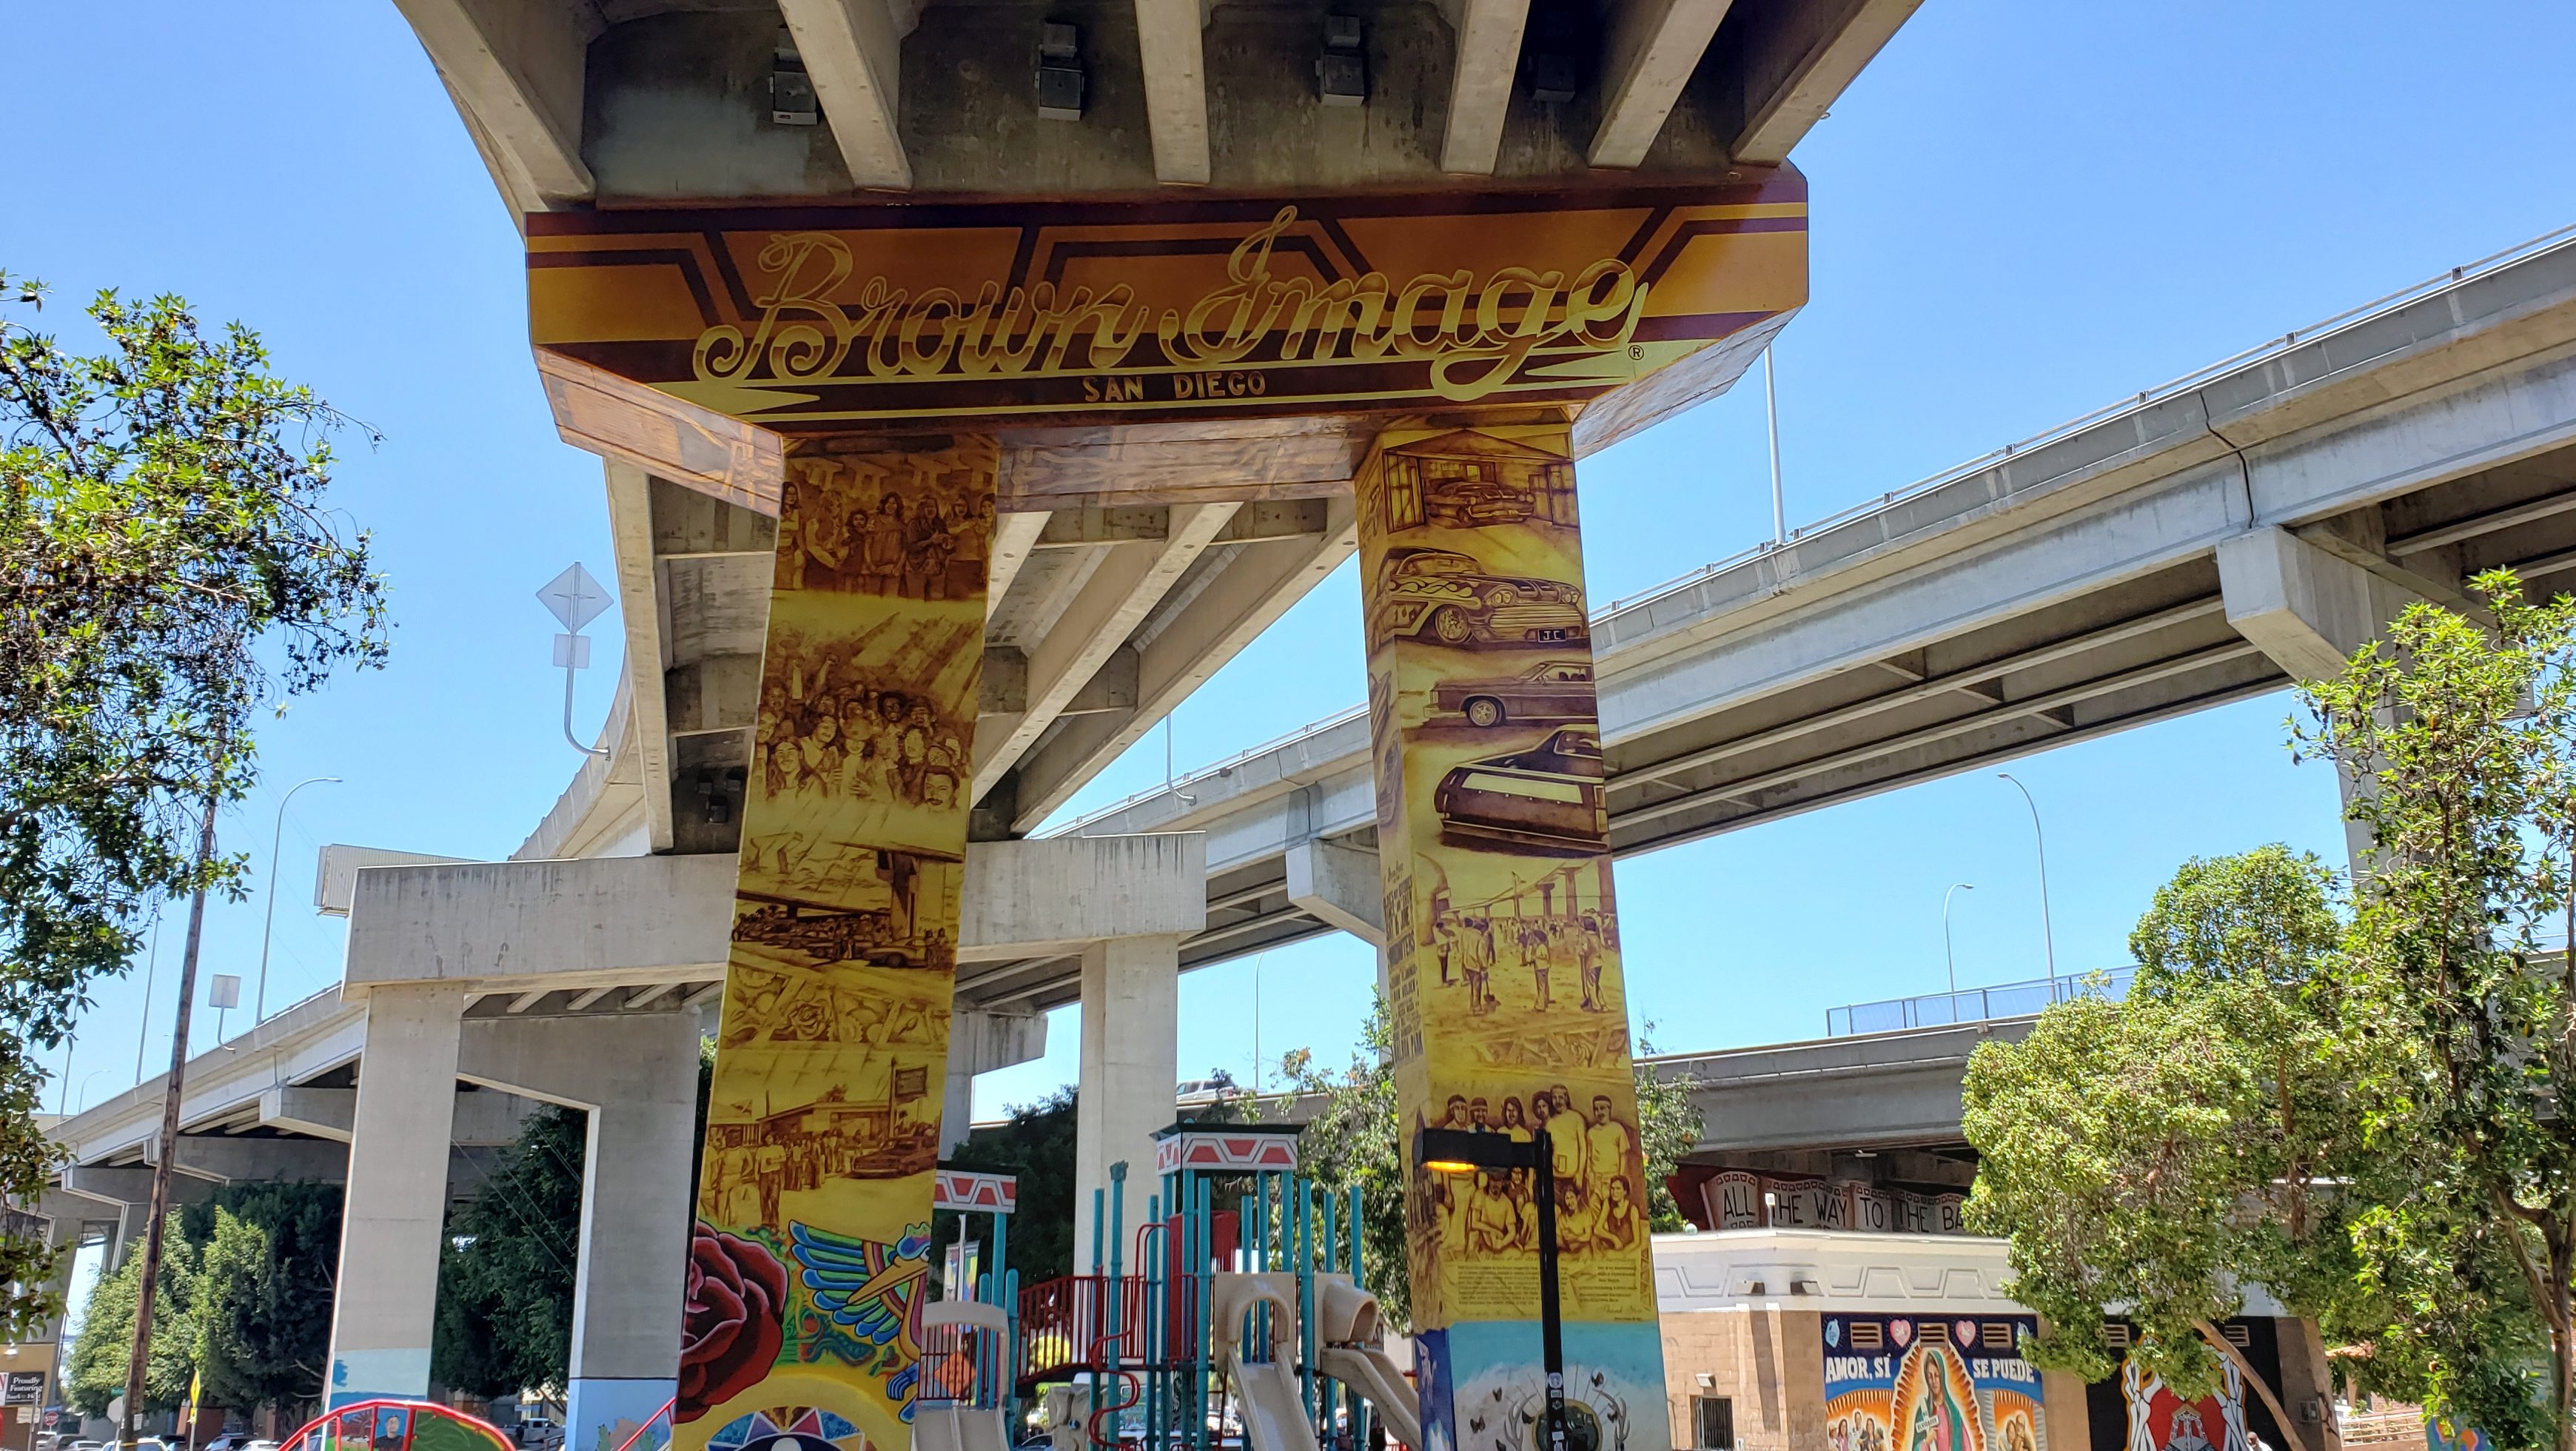 A mural on the pylon bridges supporting a freeway in what is known as Chicano Park. The mural says "Brown Image" at the top showcasing a group of individuals into car culture who rode lowriders and supported the park and its artistic efforts. There is a rose and a bird on the bottom with depictions of men and women at the demonstration site looking at the newly constructed Coronado Bridge in 1970.